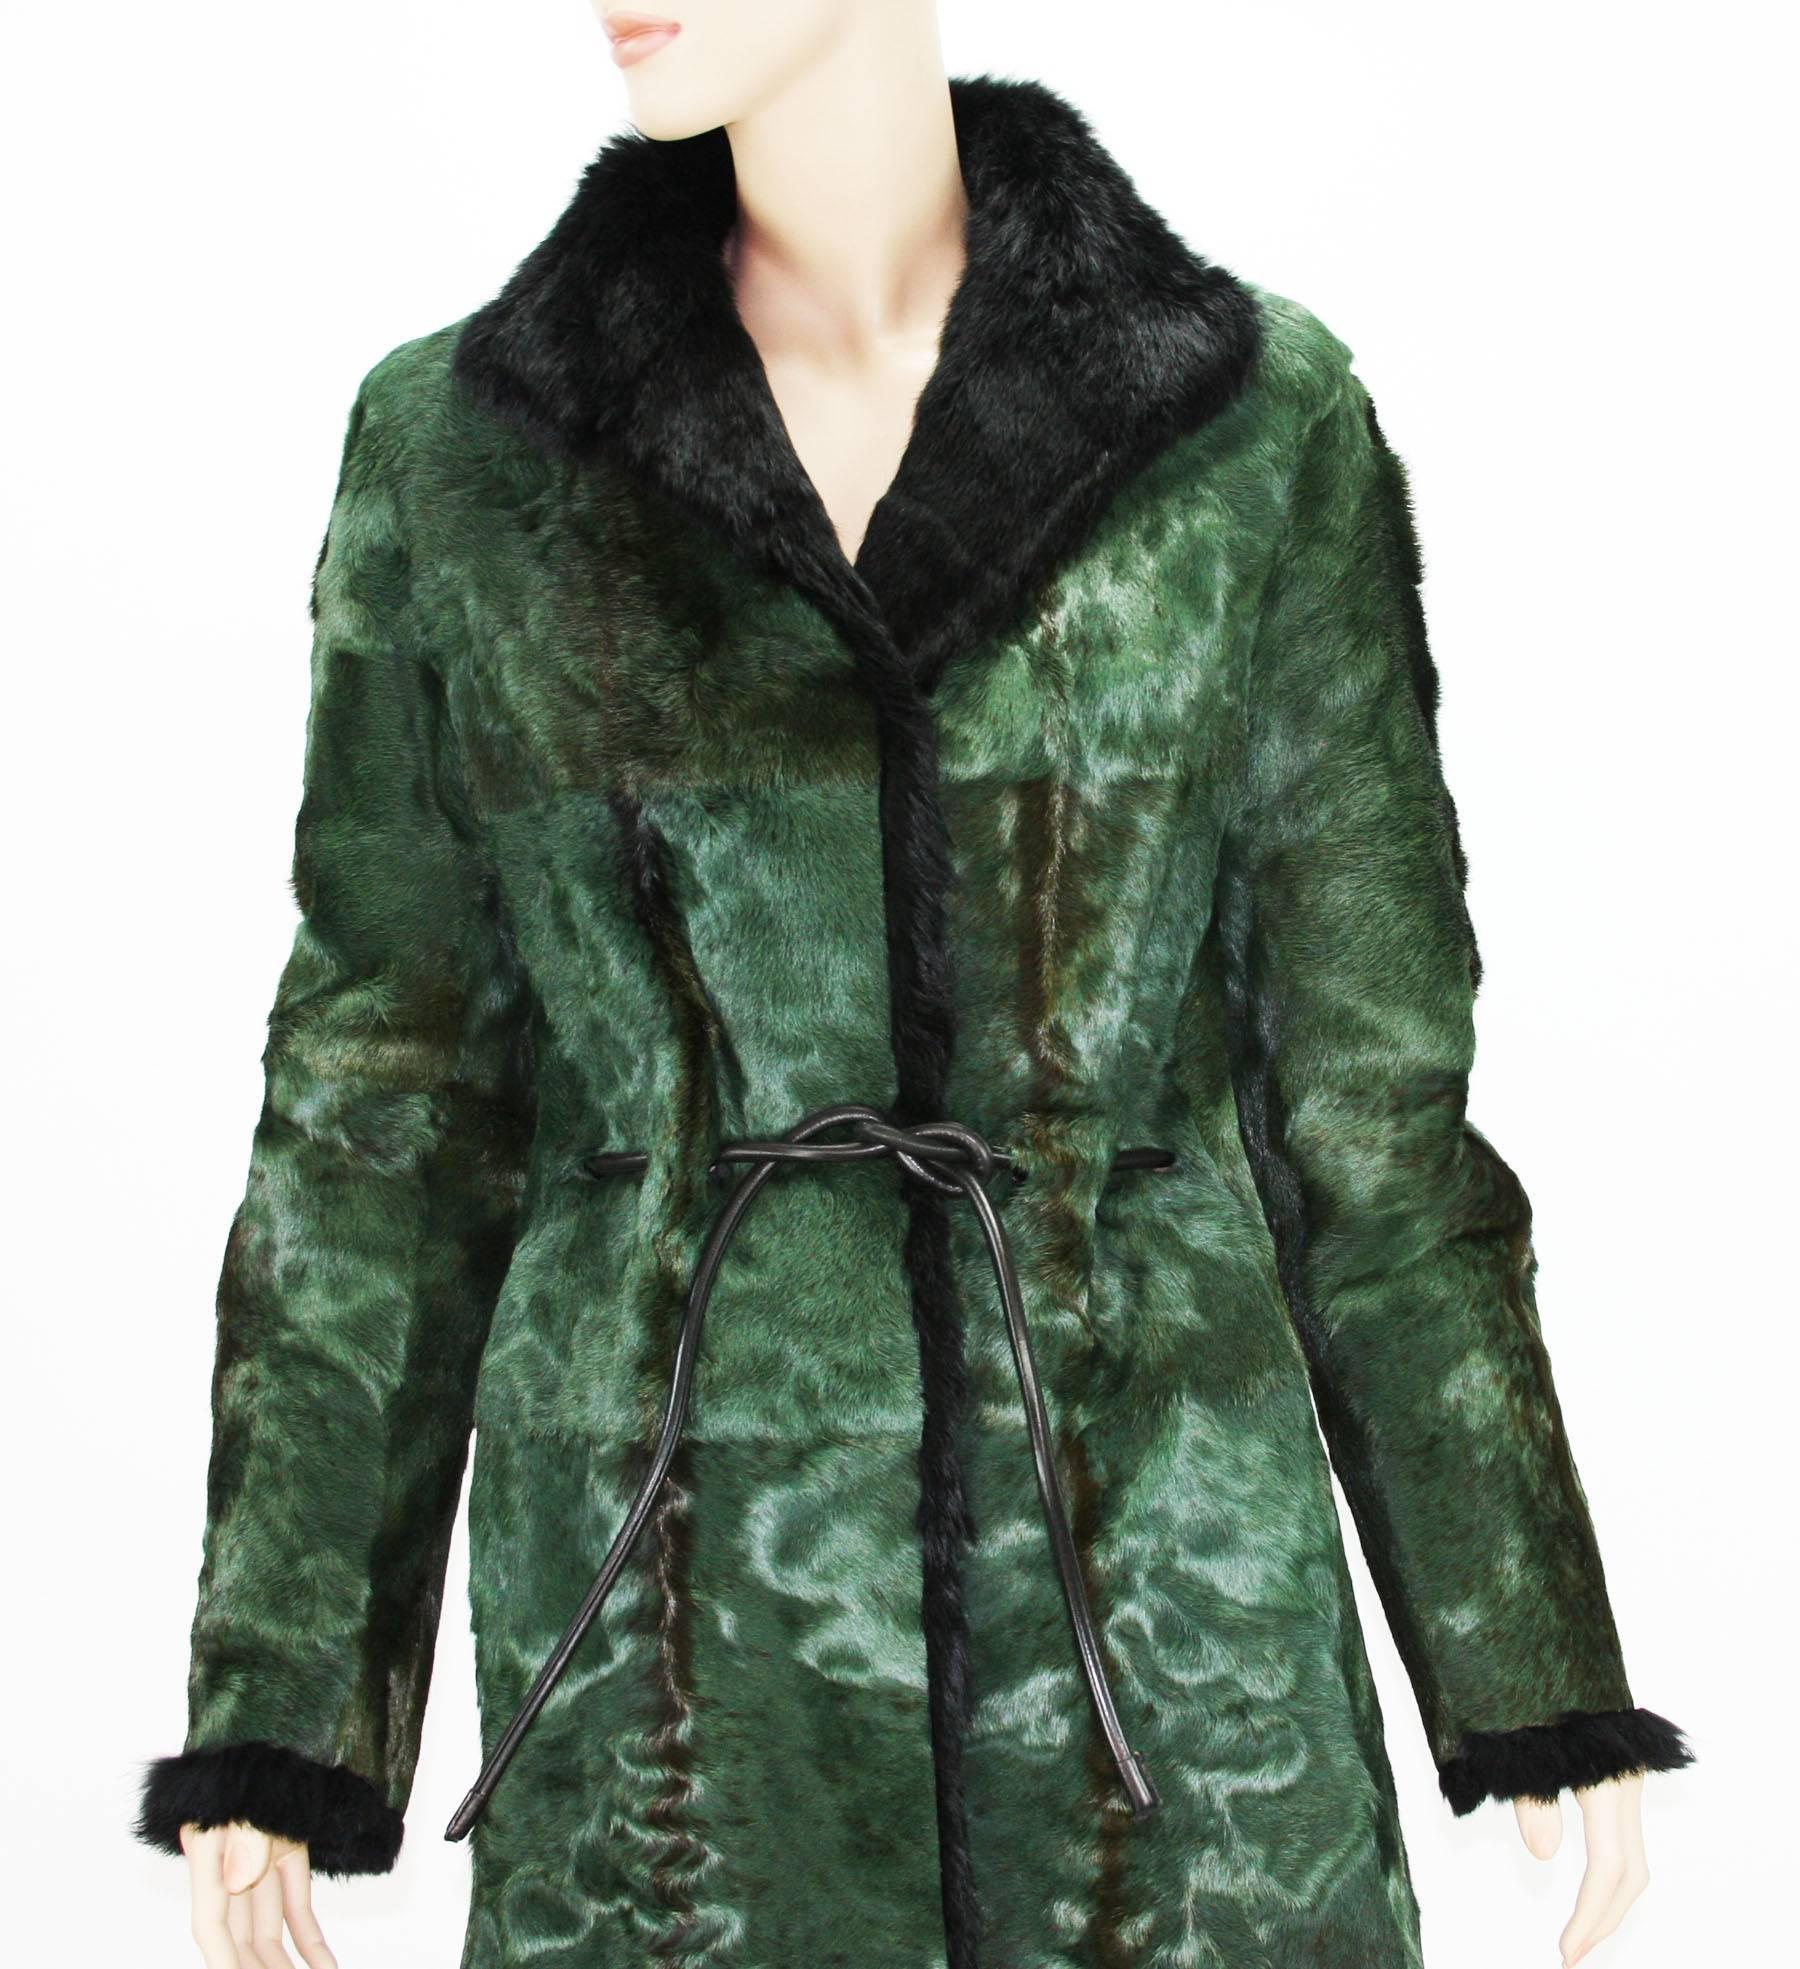 Tom Ford for Gucci 1999 Collection Reversible Emerald Green Fur Coat It. 40 For Sale 2